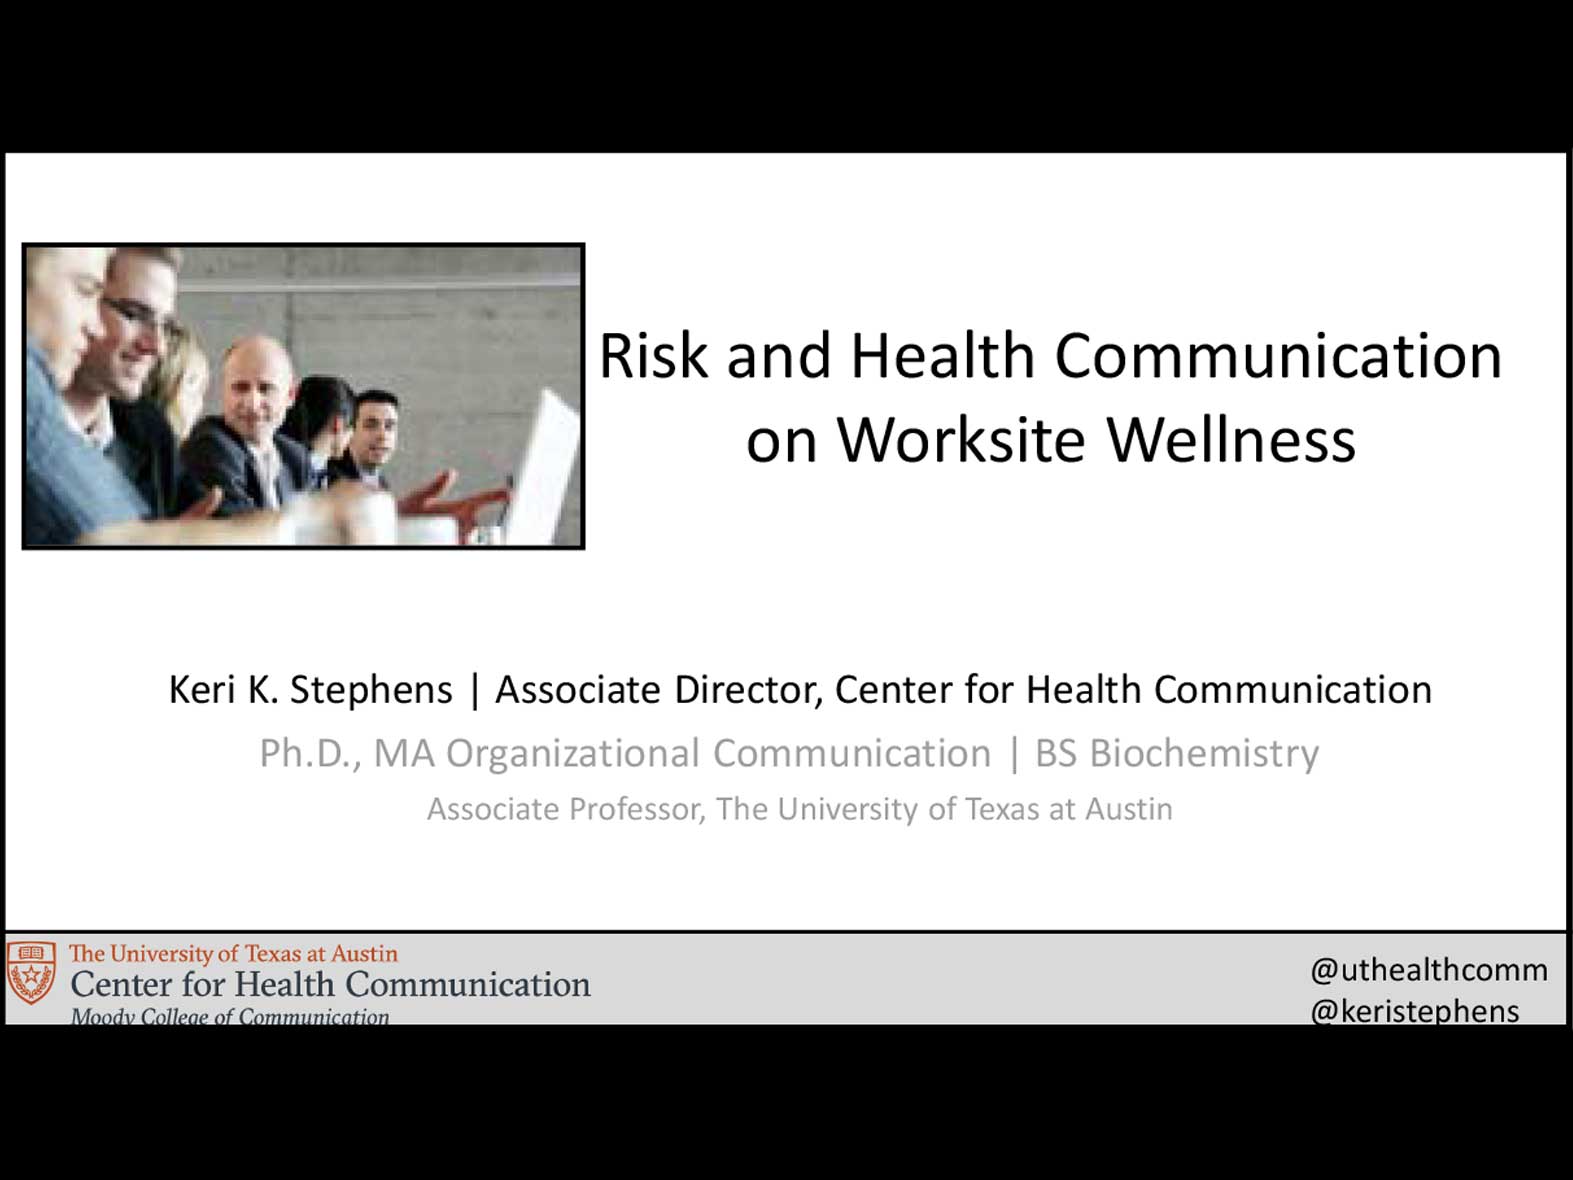 Risk and Health Communication on Worksite Wellness